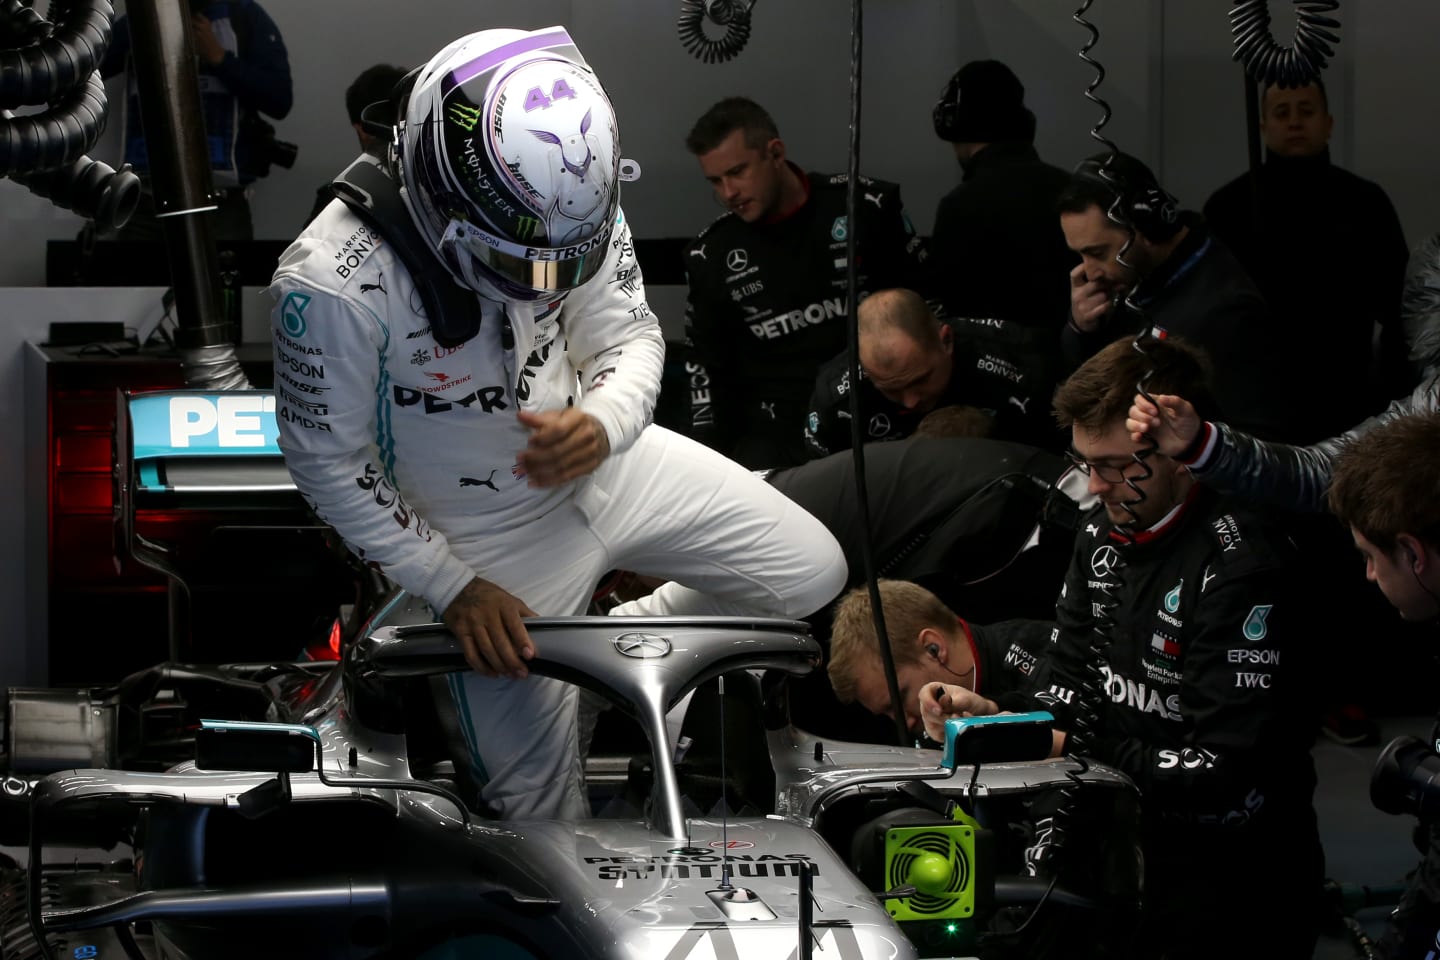 BARCELONA, SPAIN - FEBRUARY 20: Lewis Hamilton of Great Britain and Mercedes GP prepares to drive